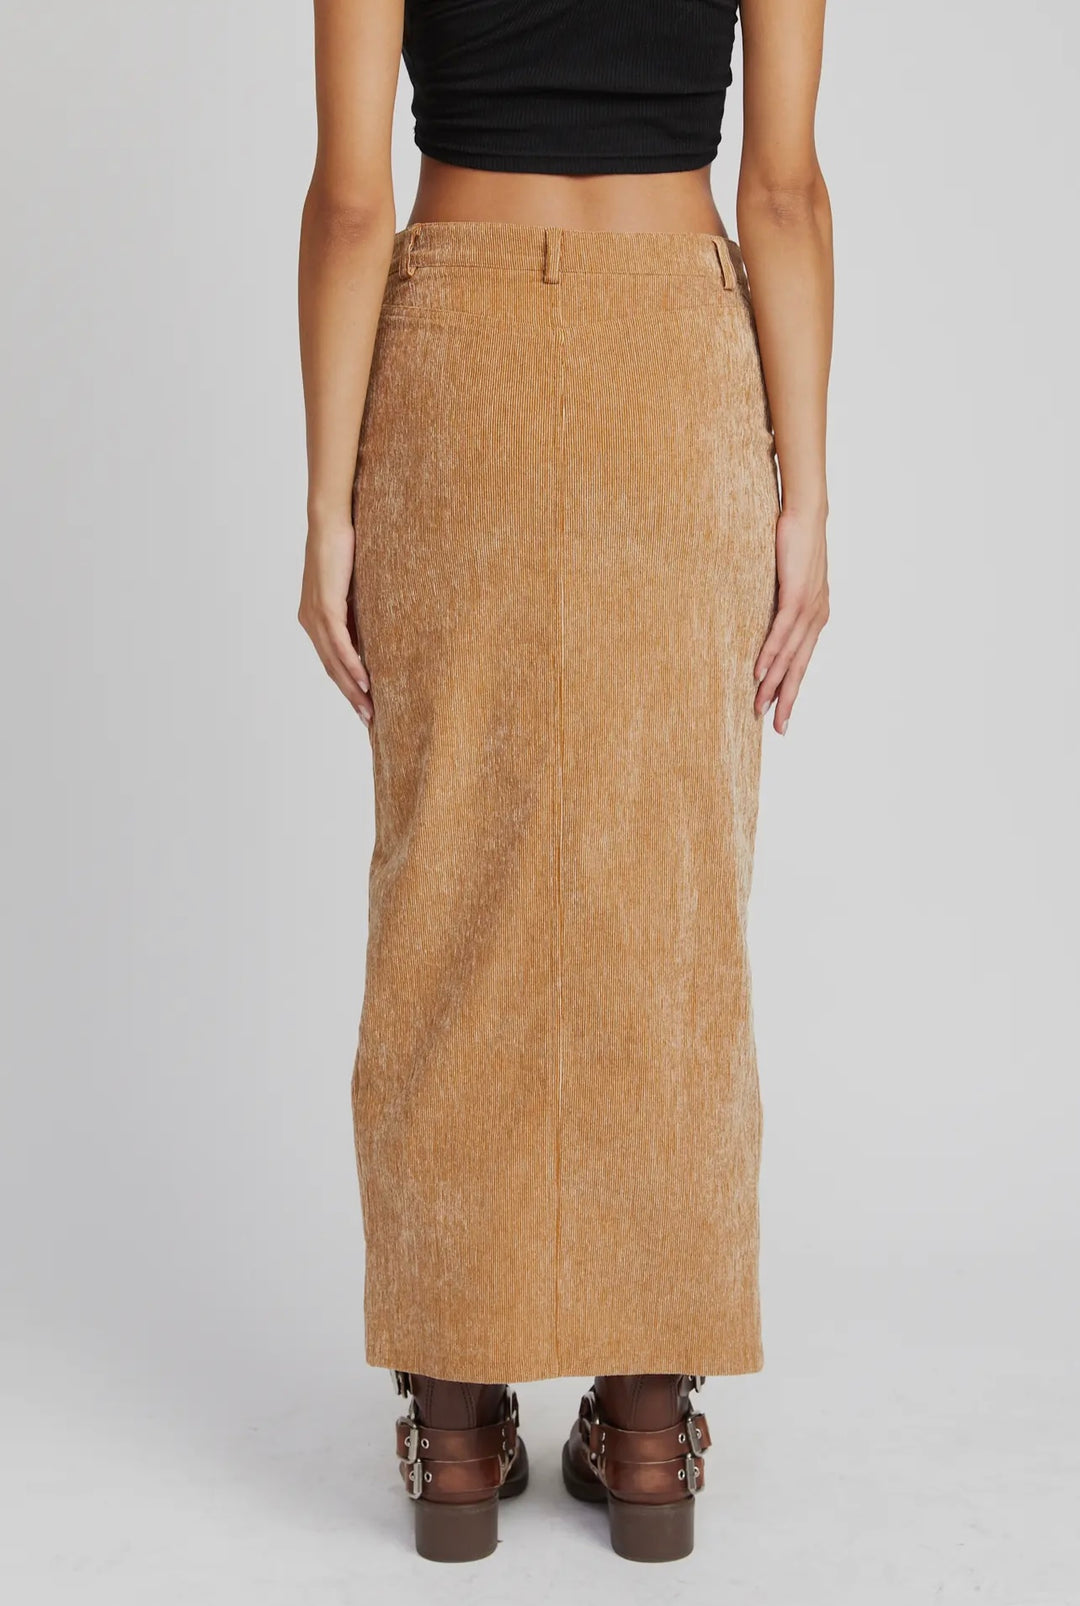 Claire Corduroy Midi Skirt with Front Slit